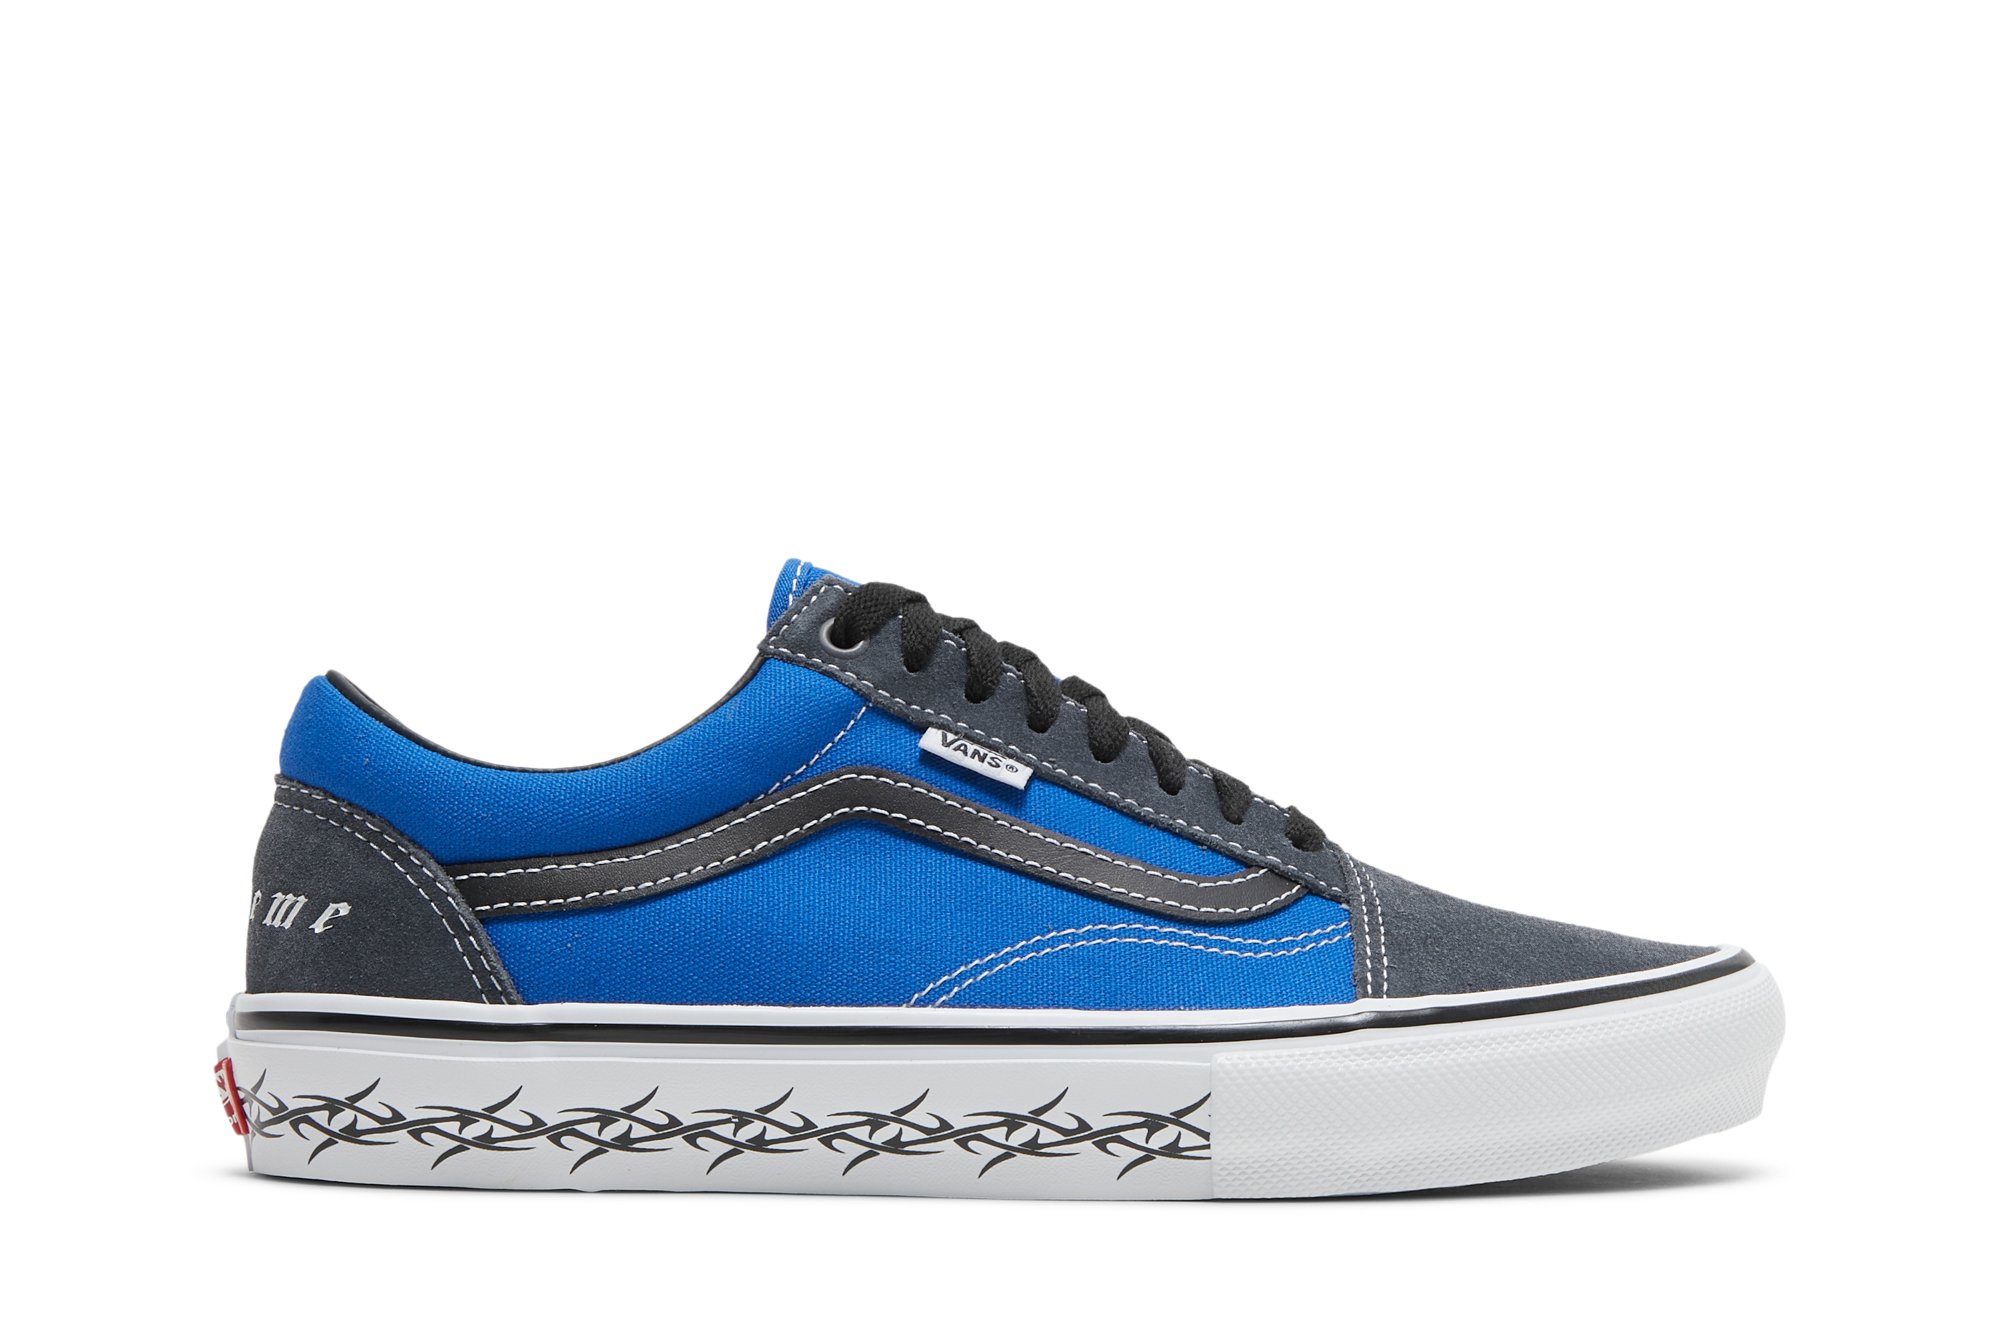 Buy Supreme x Old Skool 'Barbed Wire - Royal' - VN0A5KRXCRB | GOAT CA